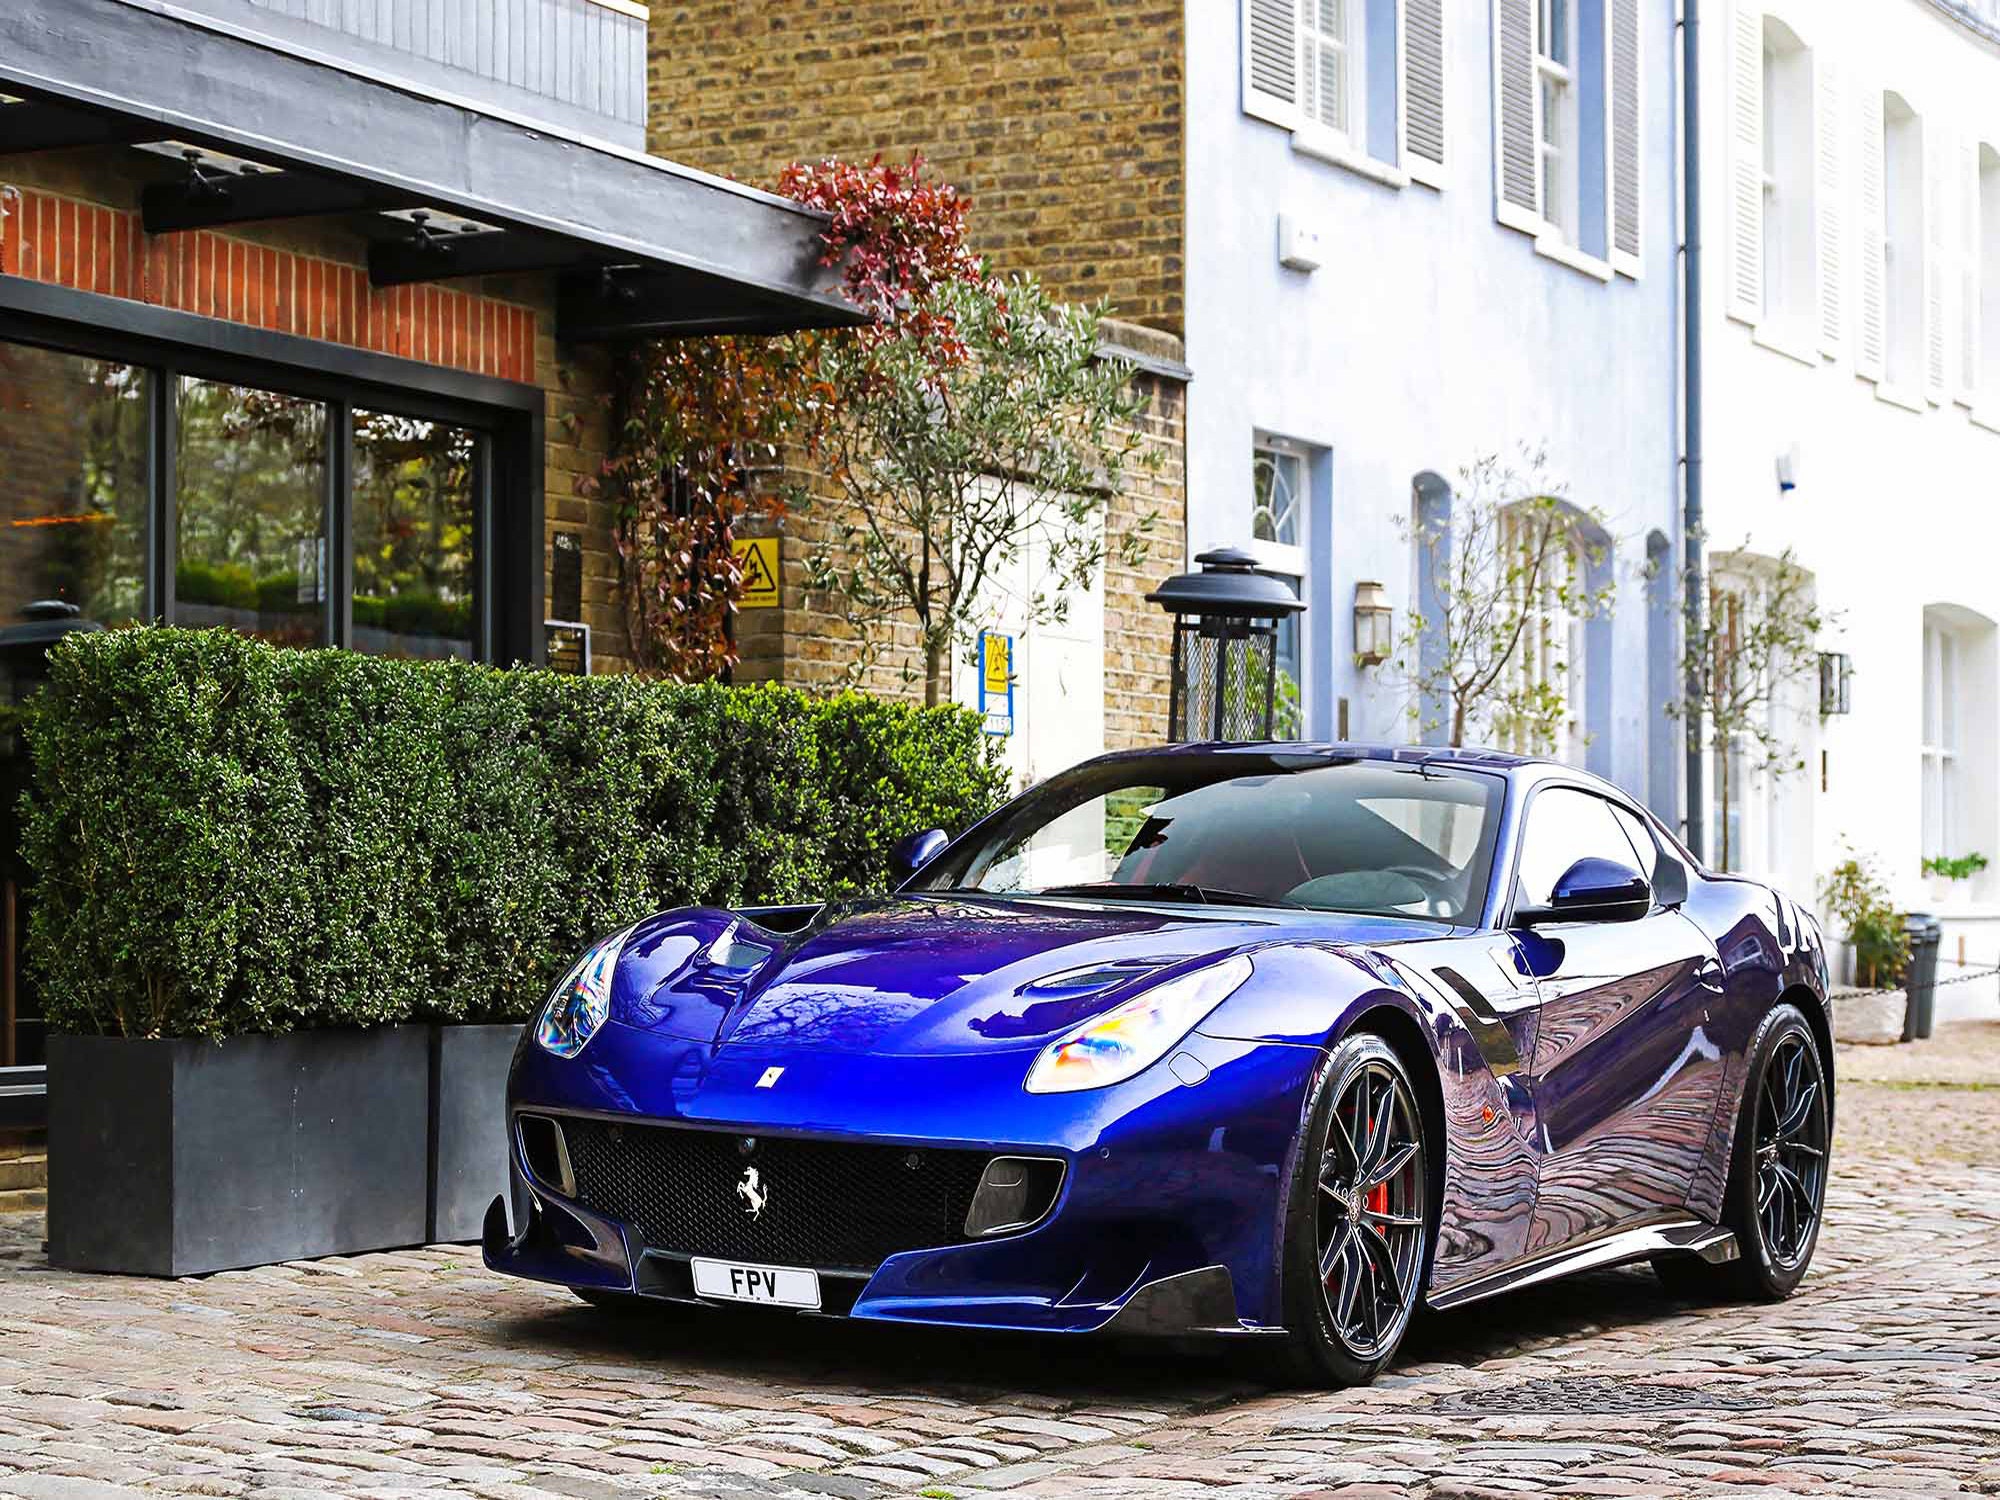 Xotiks Ferrari F12 Berlinetta - Fine Art Giclee Canvas Print Wall Art.  Professional gallery wrap style and ready to hang Photo on Canvas Gallery  Wrap